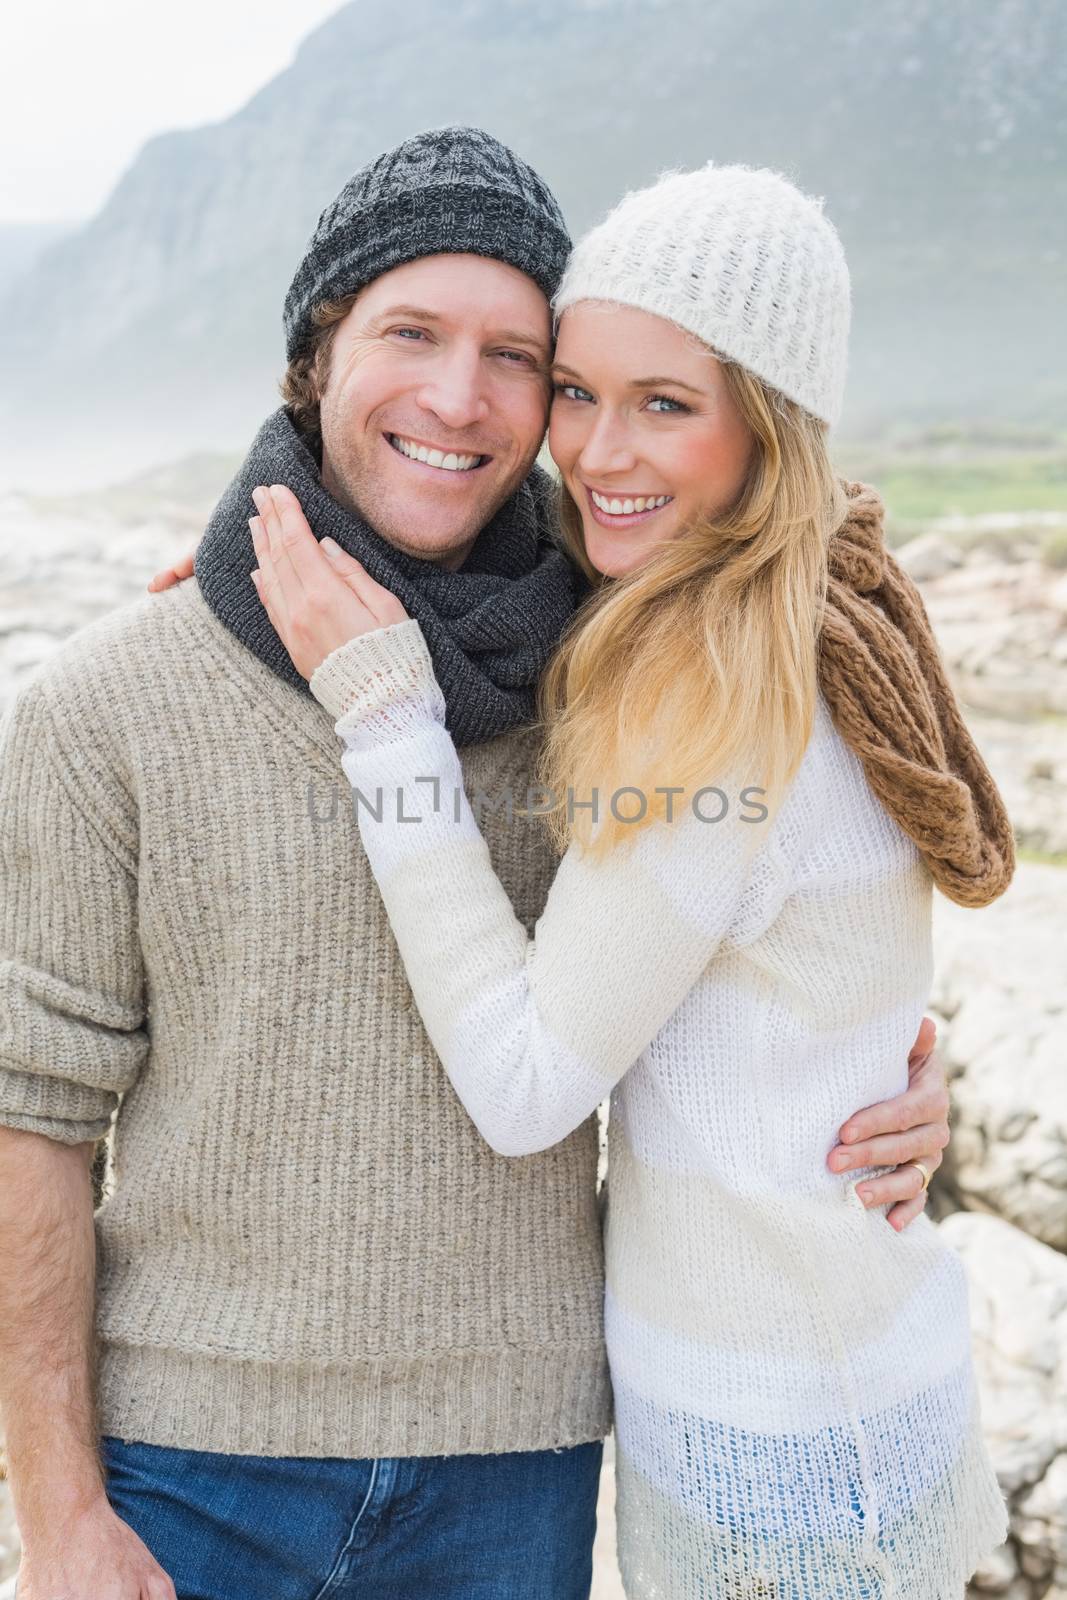 Portrait of a happy romantic young couple standing together on a rocky landscape